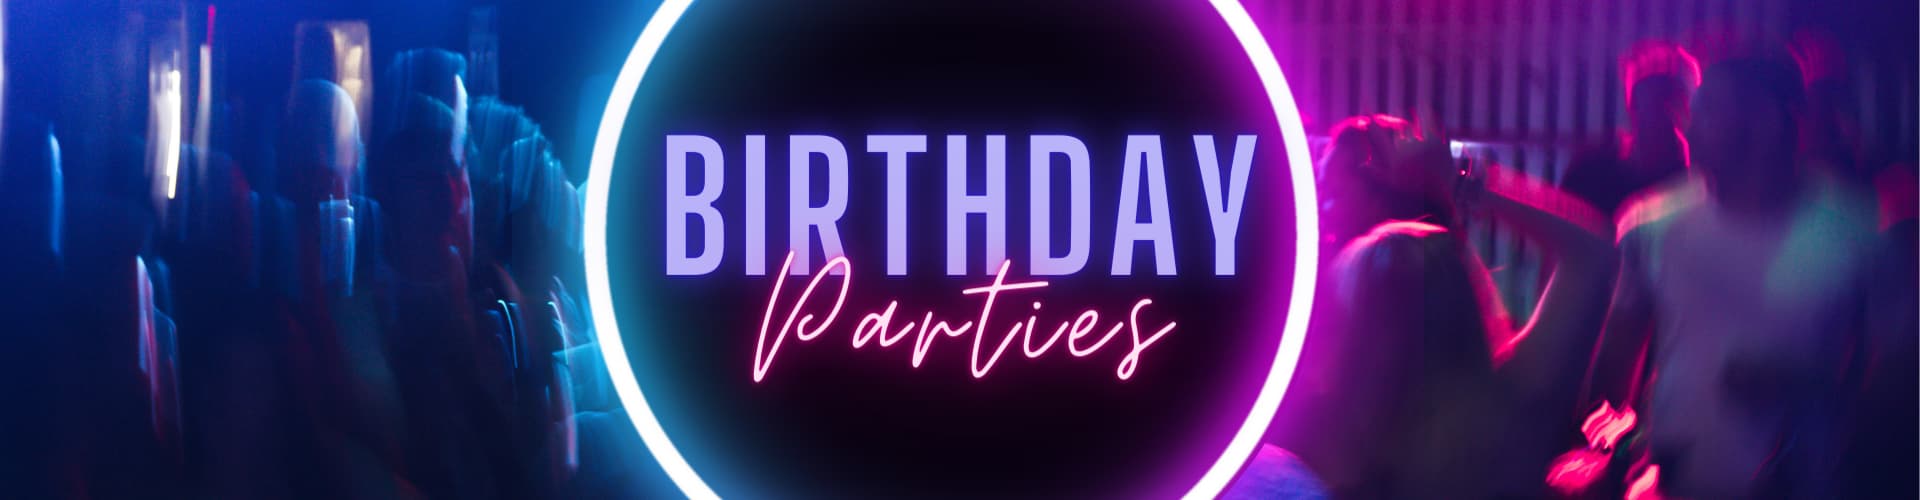 Celebrate your birthday at Sway